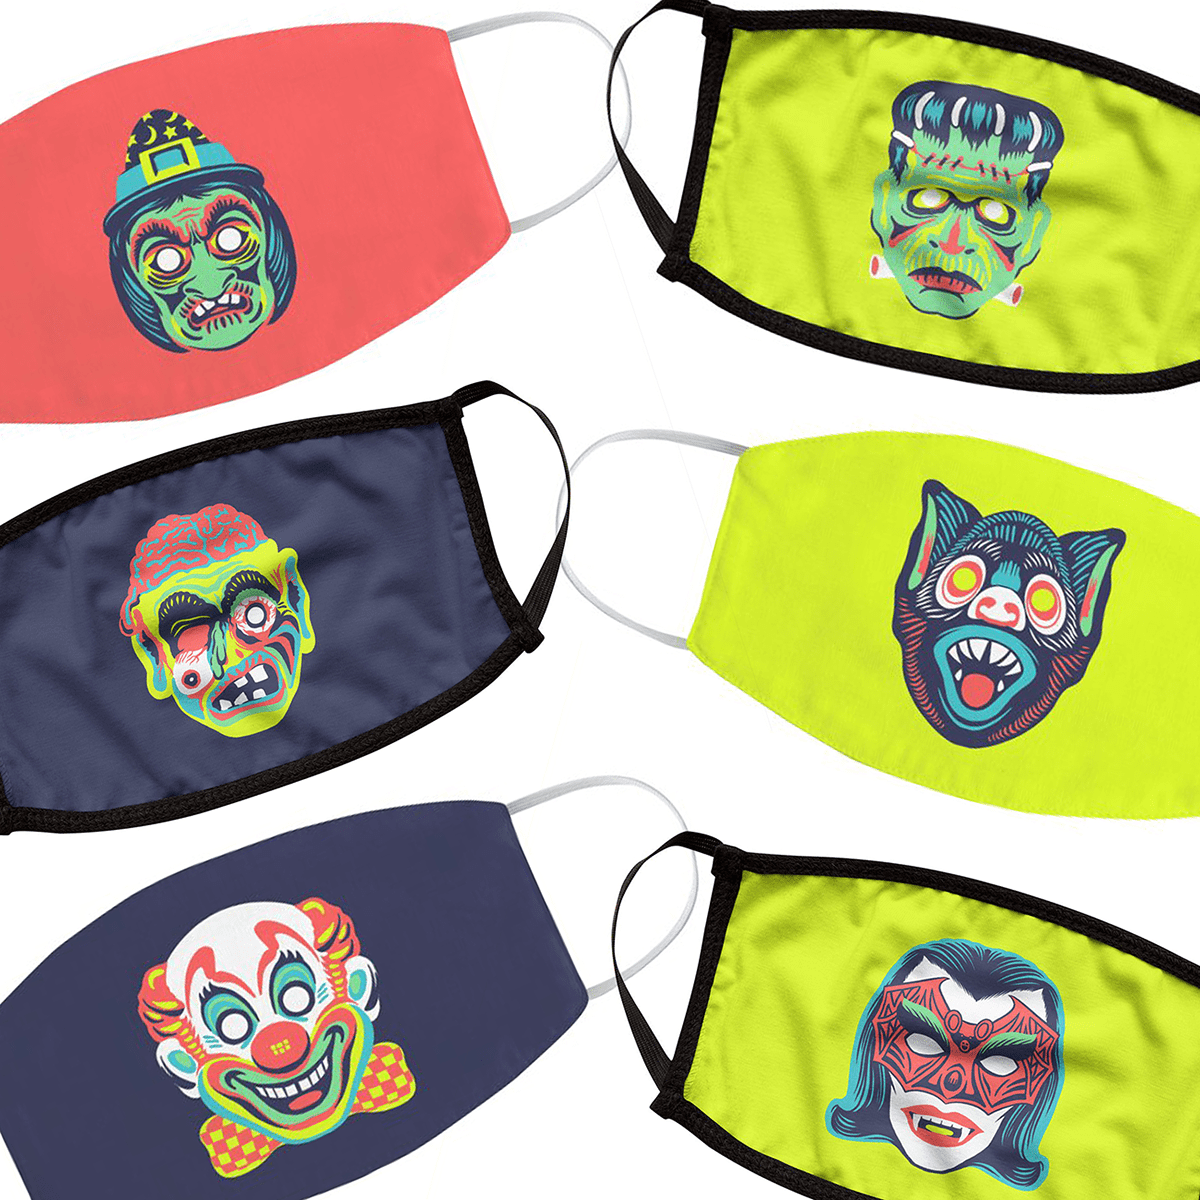 costumes Halloween masks monsters Patterns